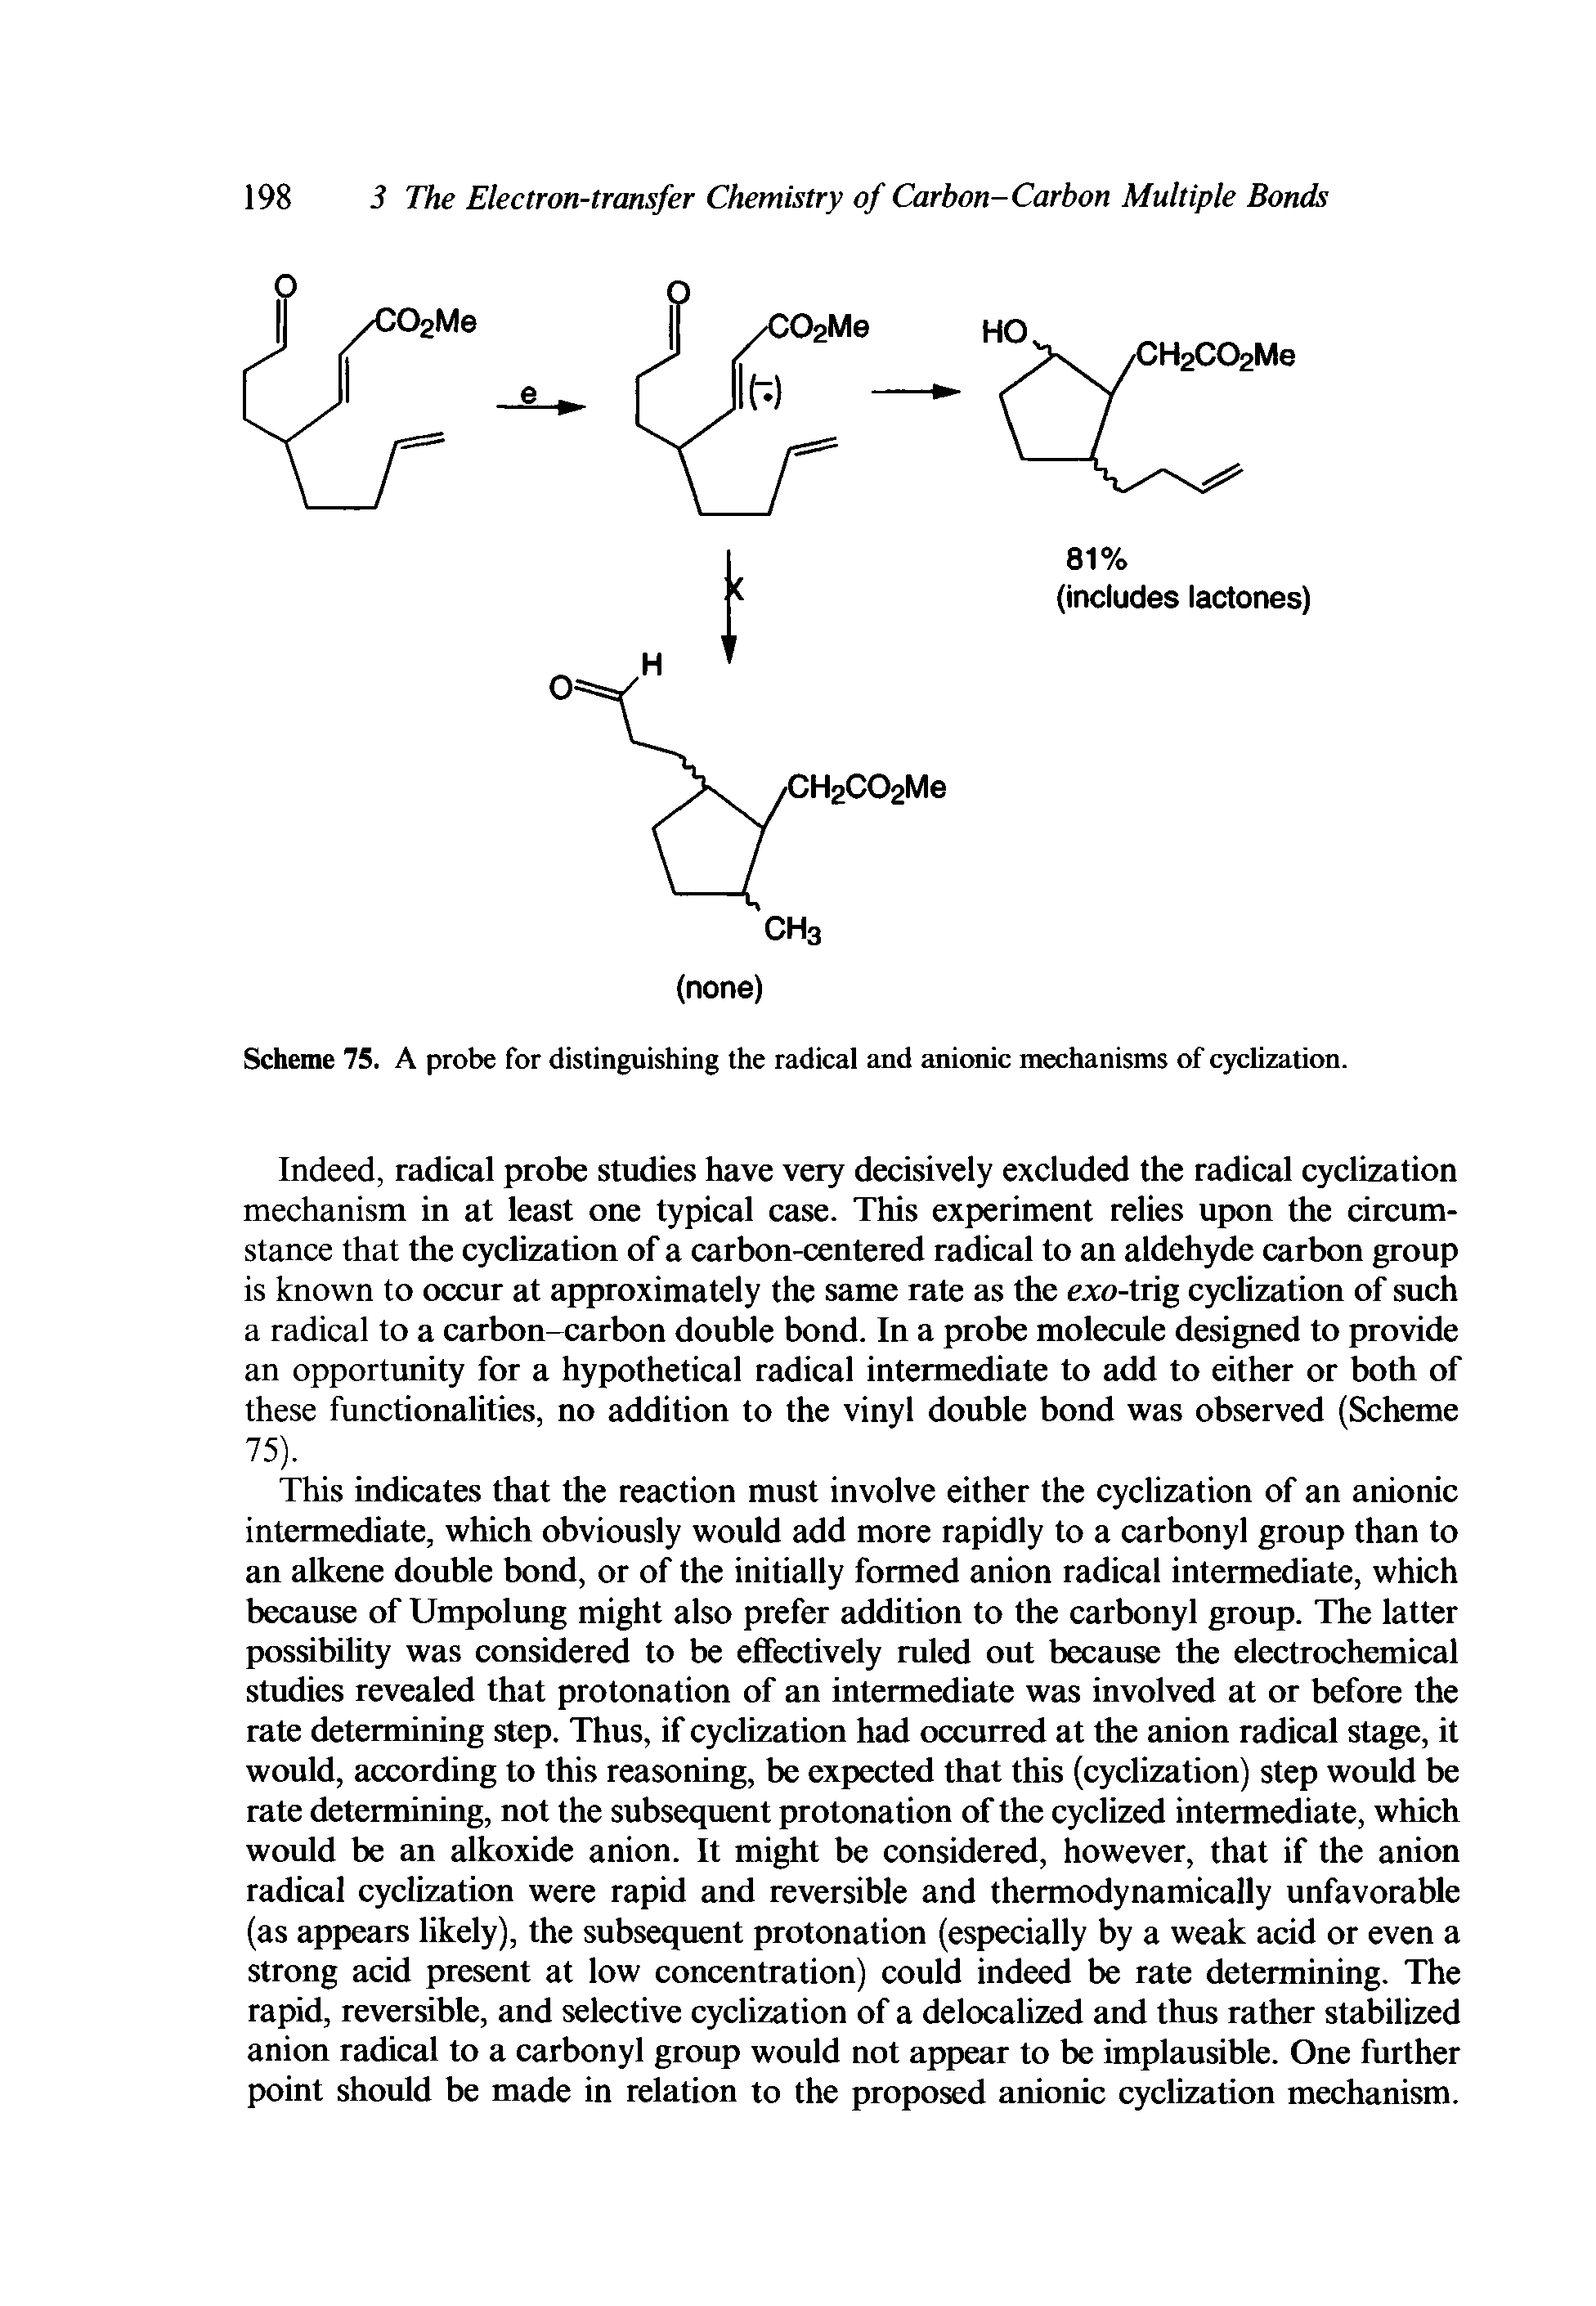 Scheme 75. A probe for distinguishing the radical and anionic mechanisms of cyclization.